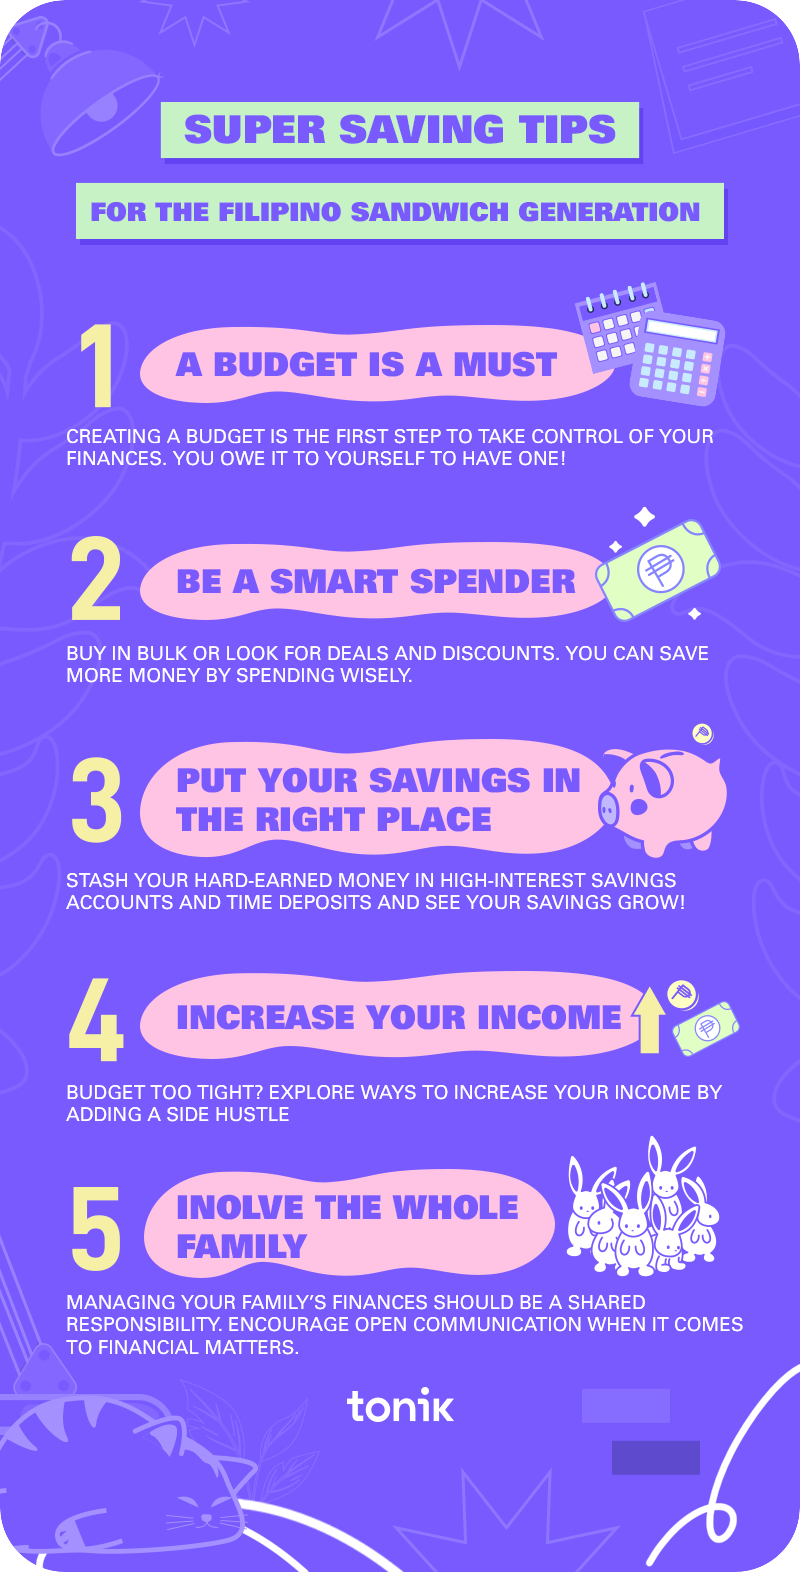 Infographic showing 5 saving tips for the Filipino Sandwich Generation